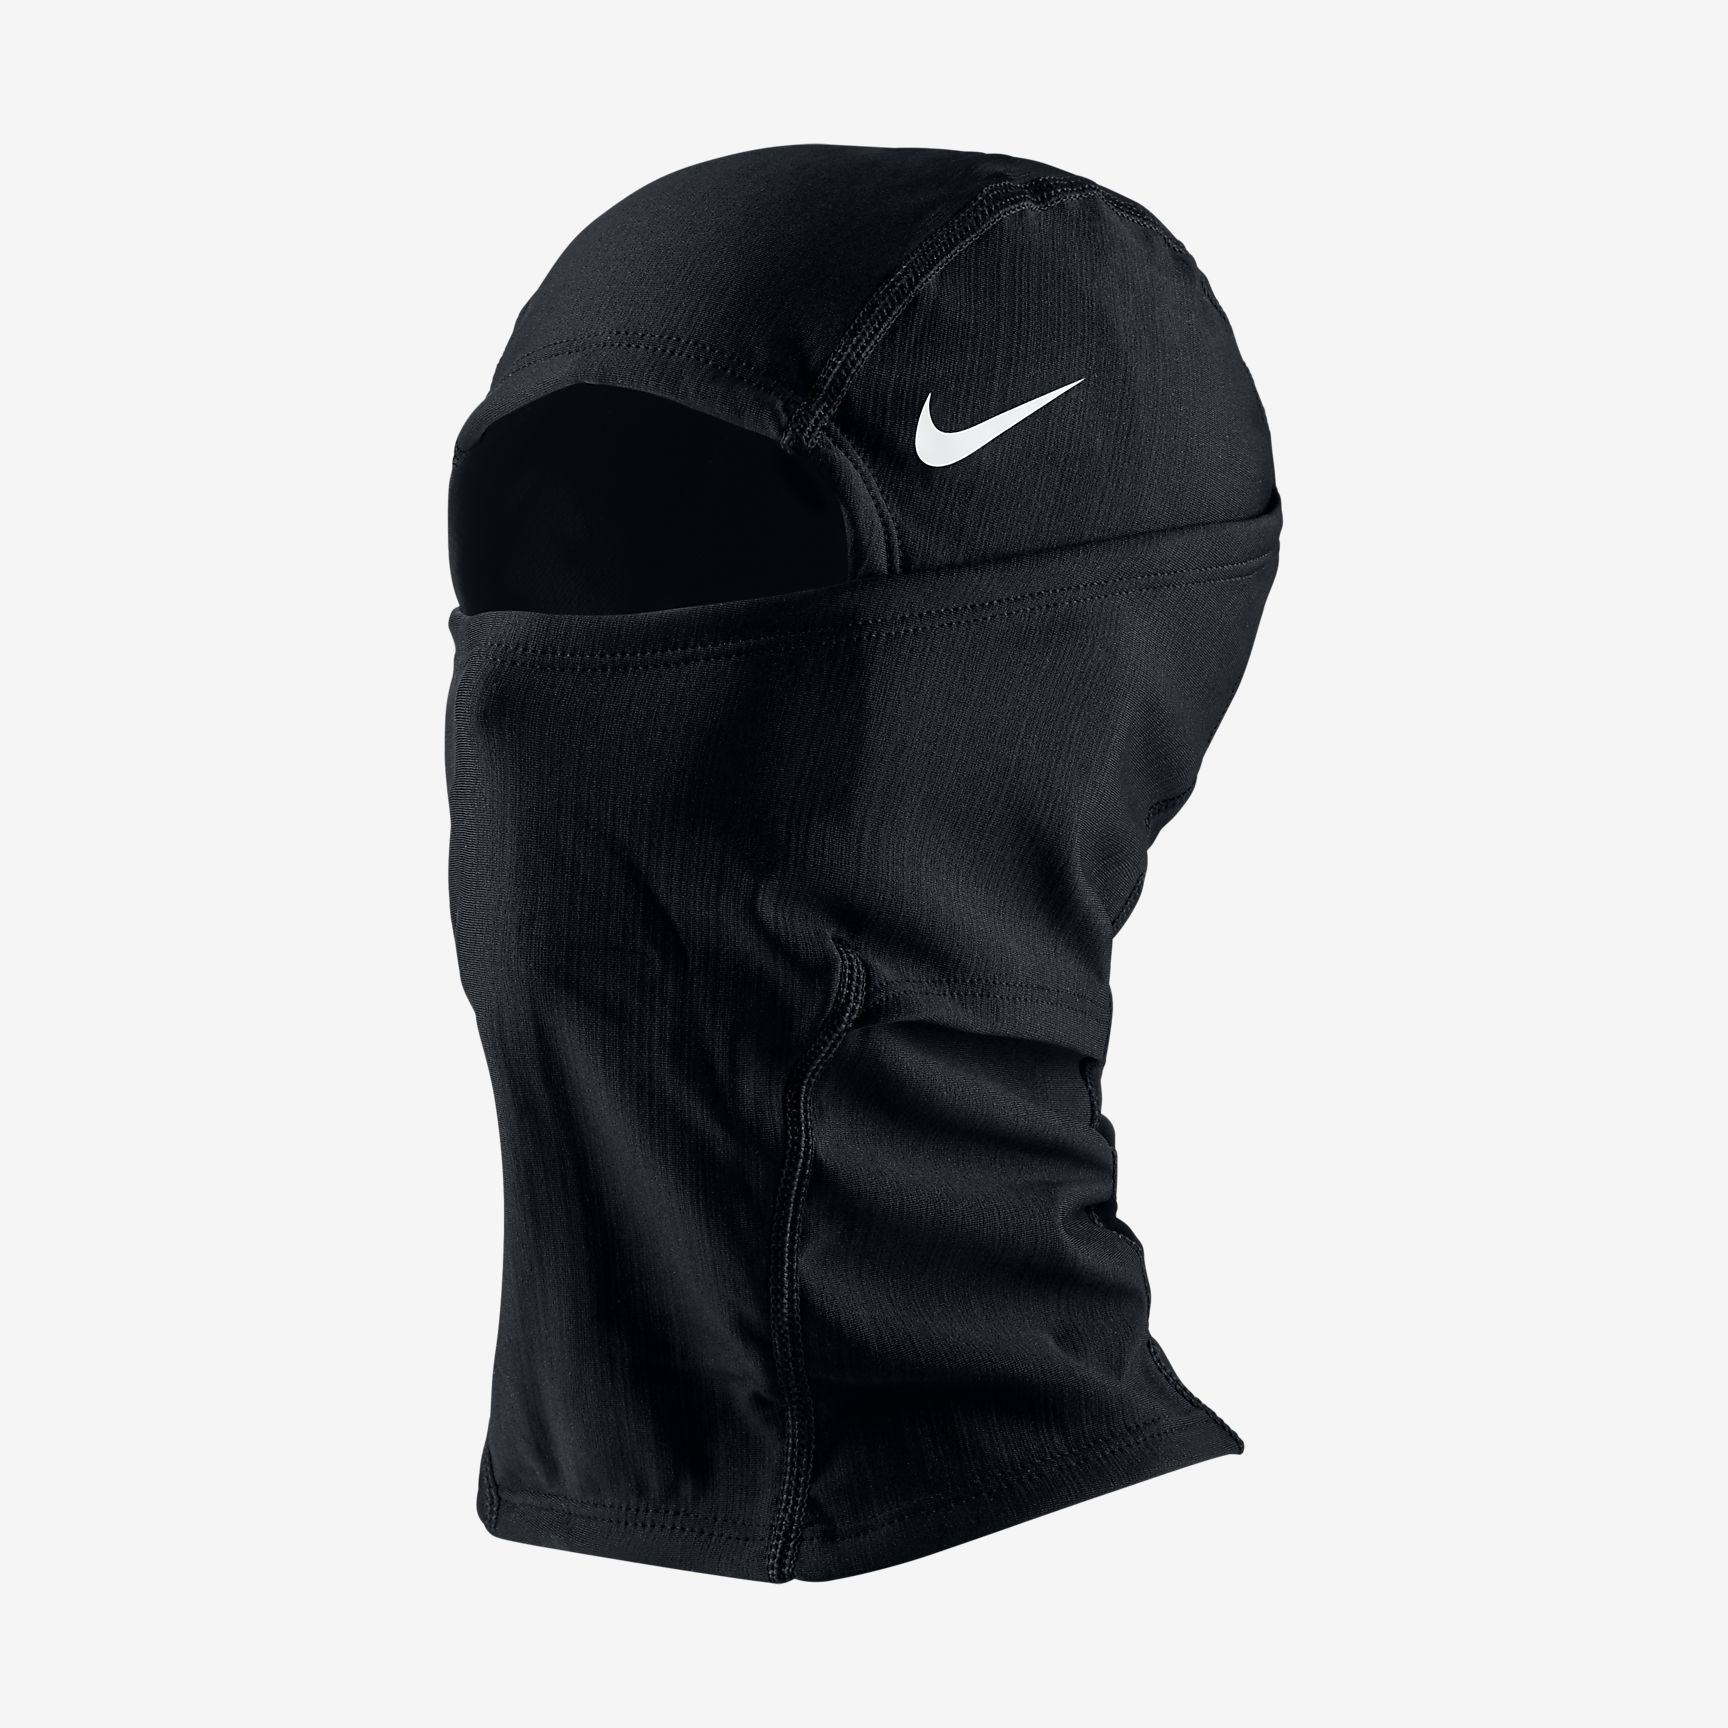 Richard Lawler on X: "Nike still bizarrely doesn't sell face masks but the  Pro Hyperwarm hood is back in stock after being sold out for a while  https://t.co/6gy5pfOpM3 https://t.co/oYcgbObd6V" / X